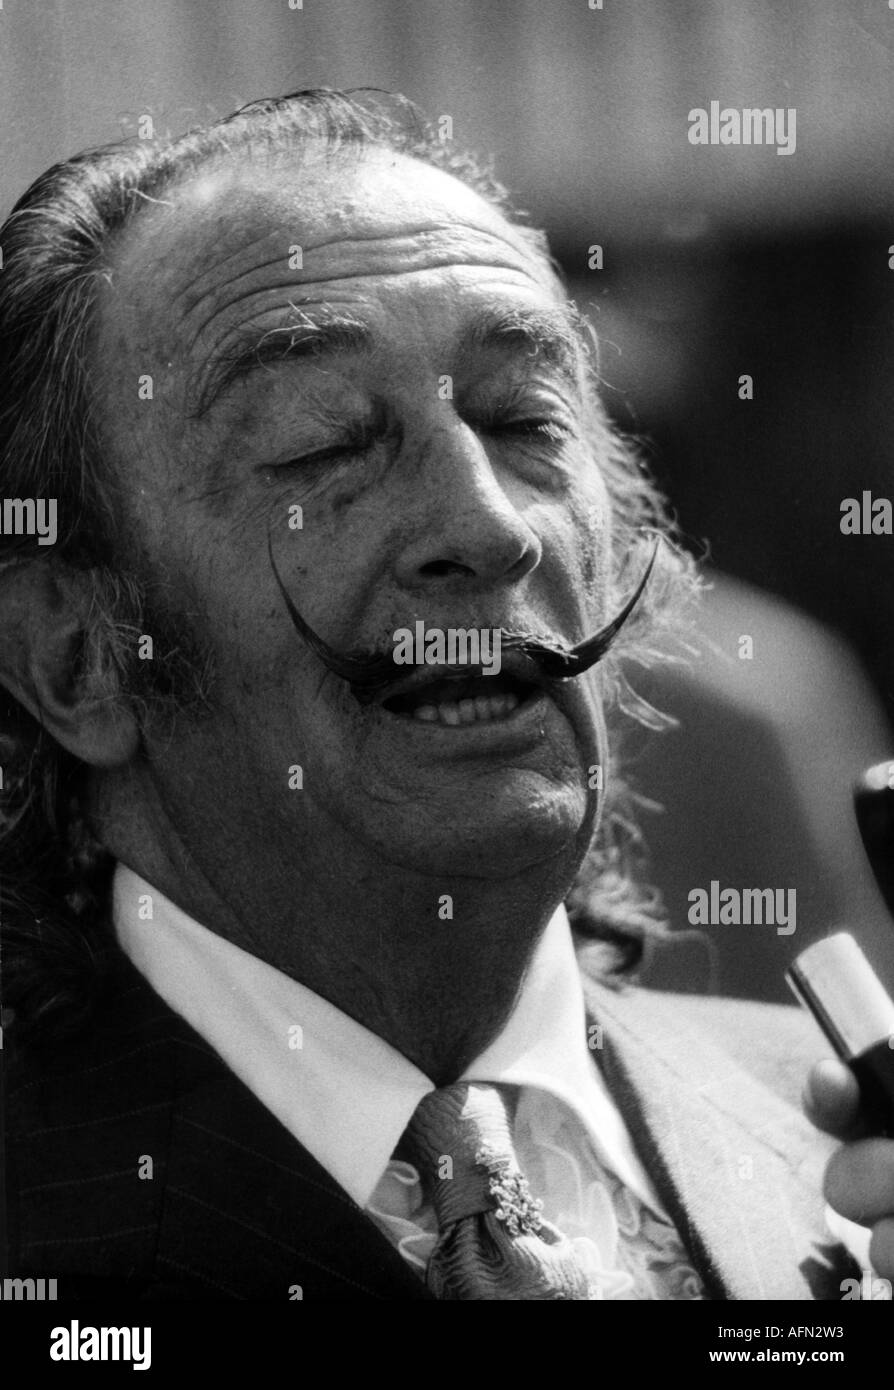 Dali, Salvador, 11.5.1904 - 23.1.1989, Spanish painter and sculptor, portrait, with closed eyes, late 1960s, Stock Photo